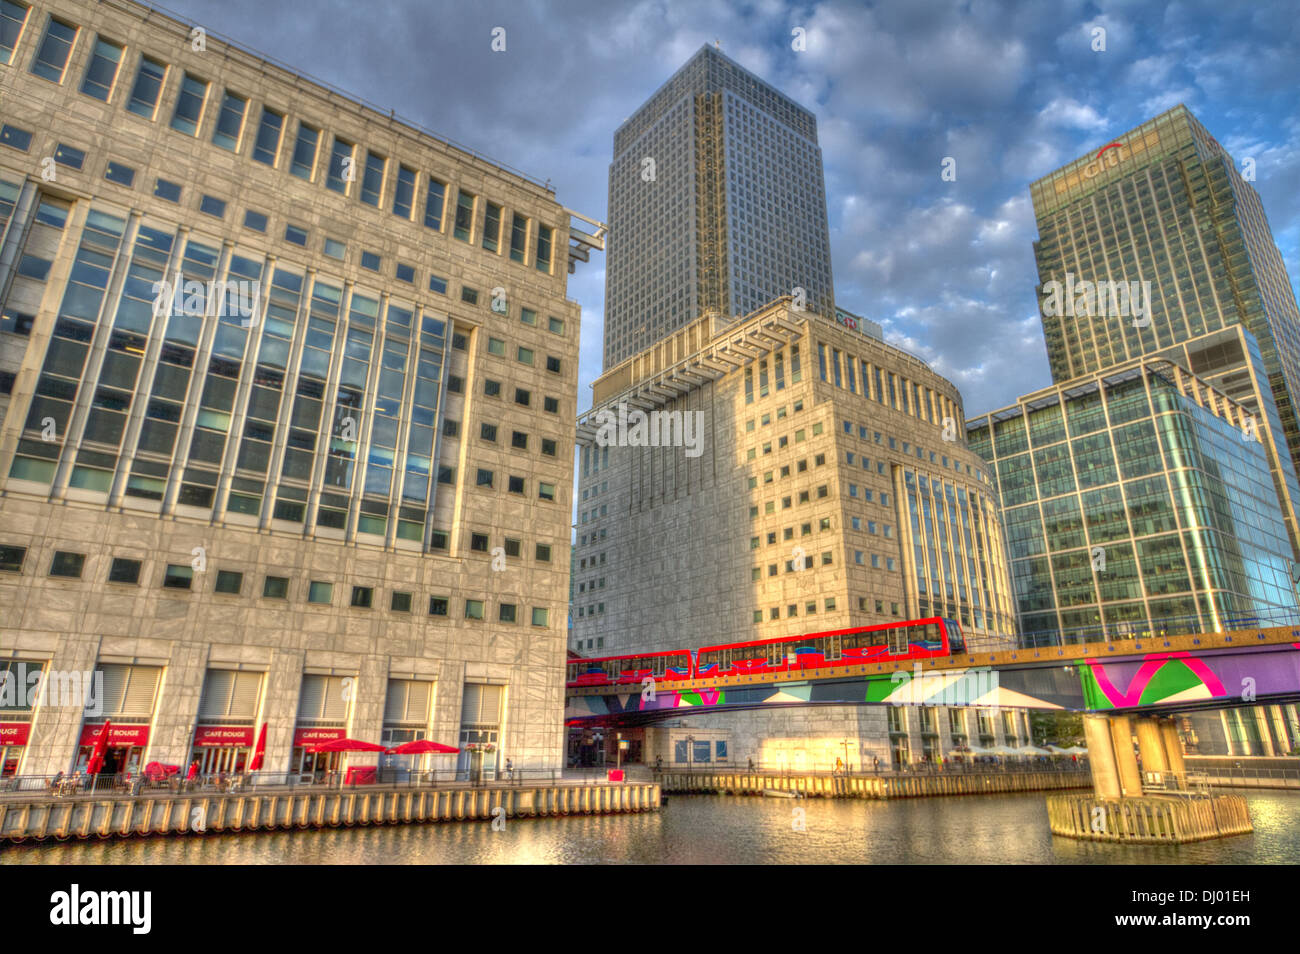 Canary Wharf with Dockland Light Railway train leaving the station Stock Photo